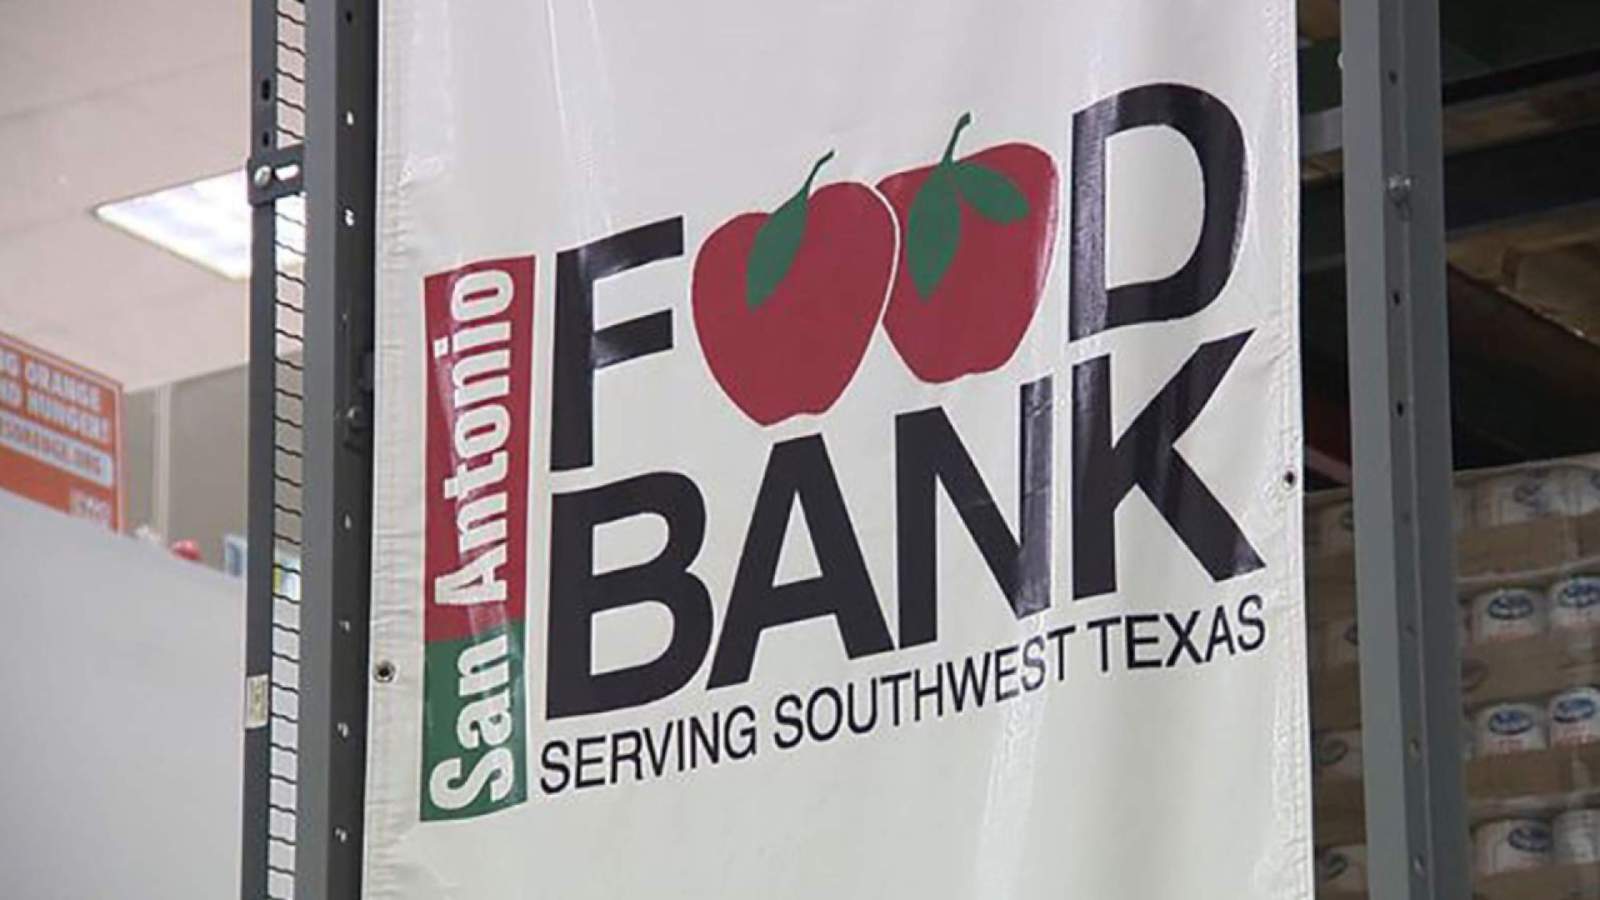 Emergency fund established to help San Antonians affected by winter storm